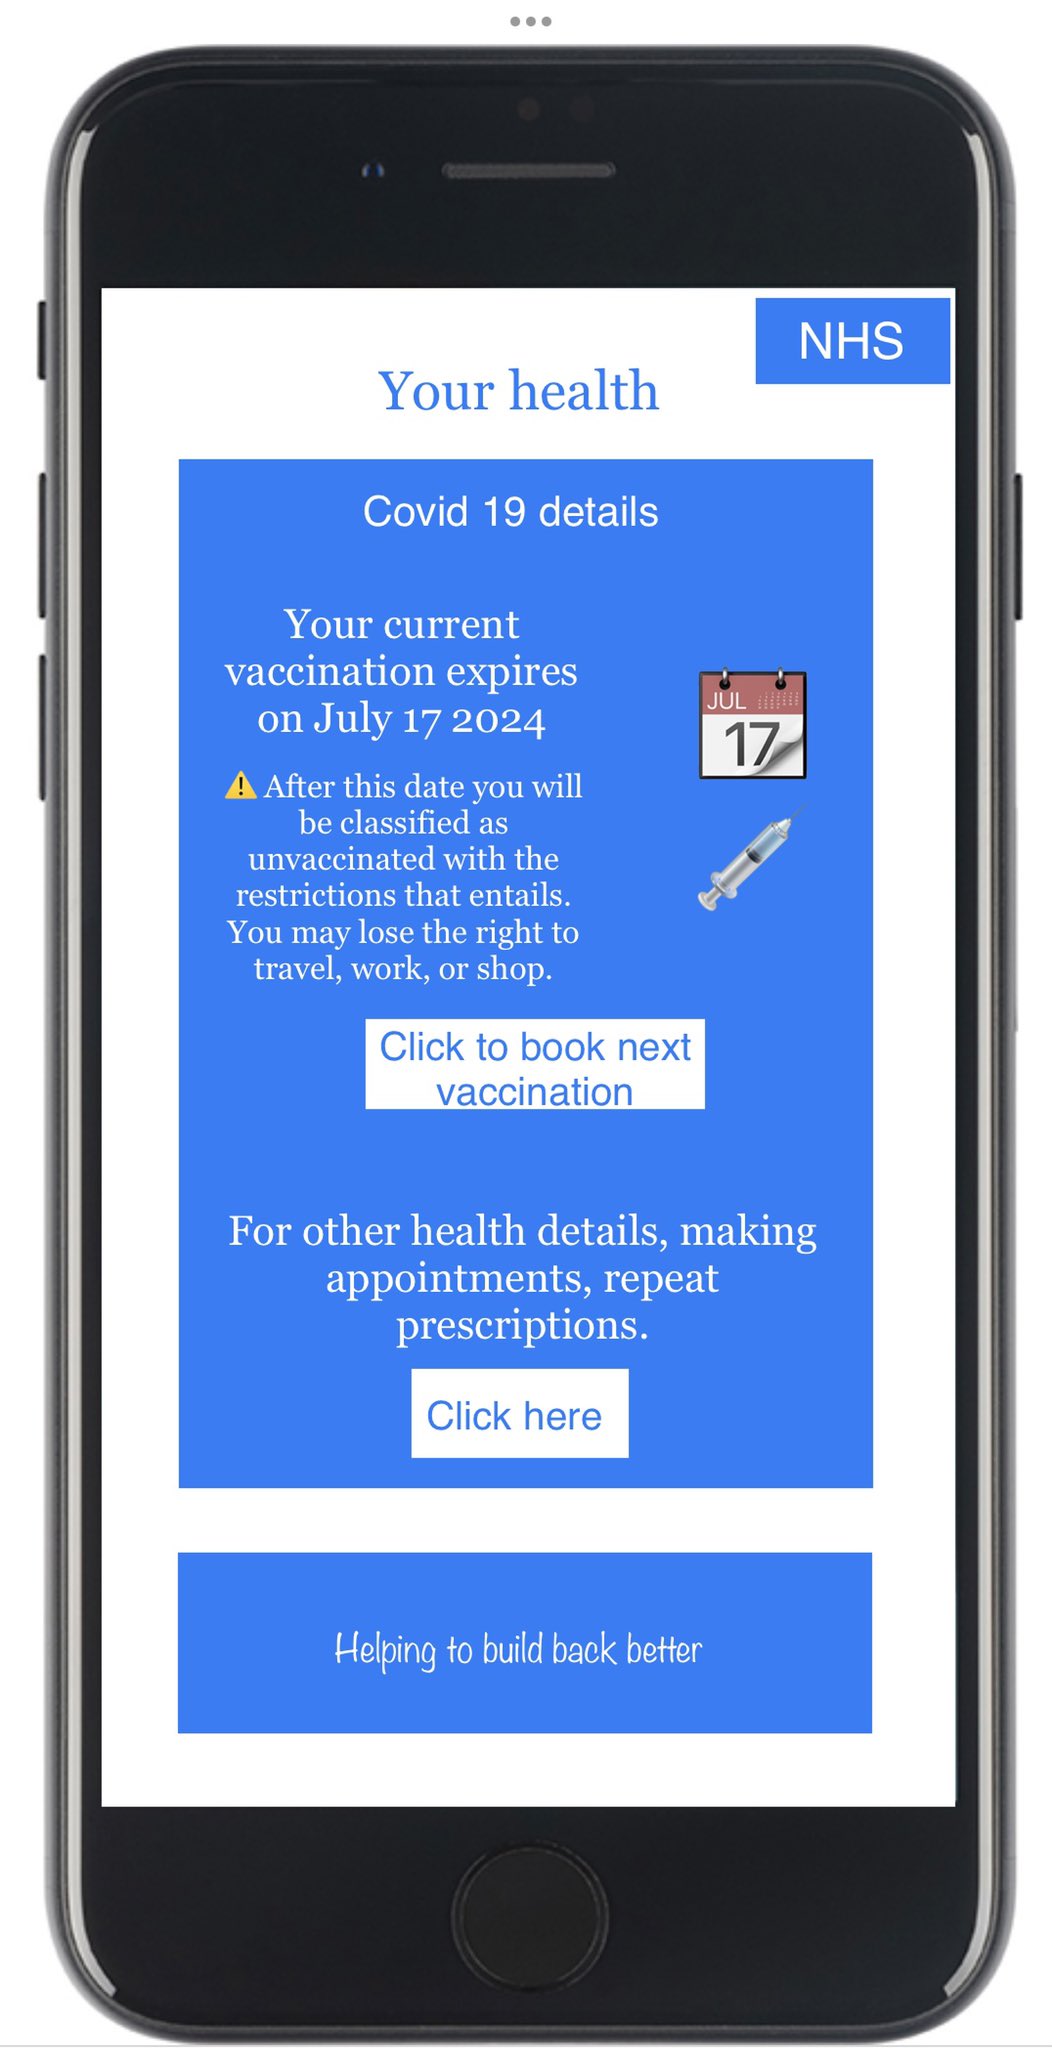 Your health. NHS. Covid 19 details. Your current vaccination expires on July 17 2024. After this date you will be classified as unvaccinated with the restrictions that entails. You may lose the right to travel, work, or shop. Click to book next vaccination. For other health details, making appointments, repeat prescriptions. Click here. Helping to build back better.